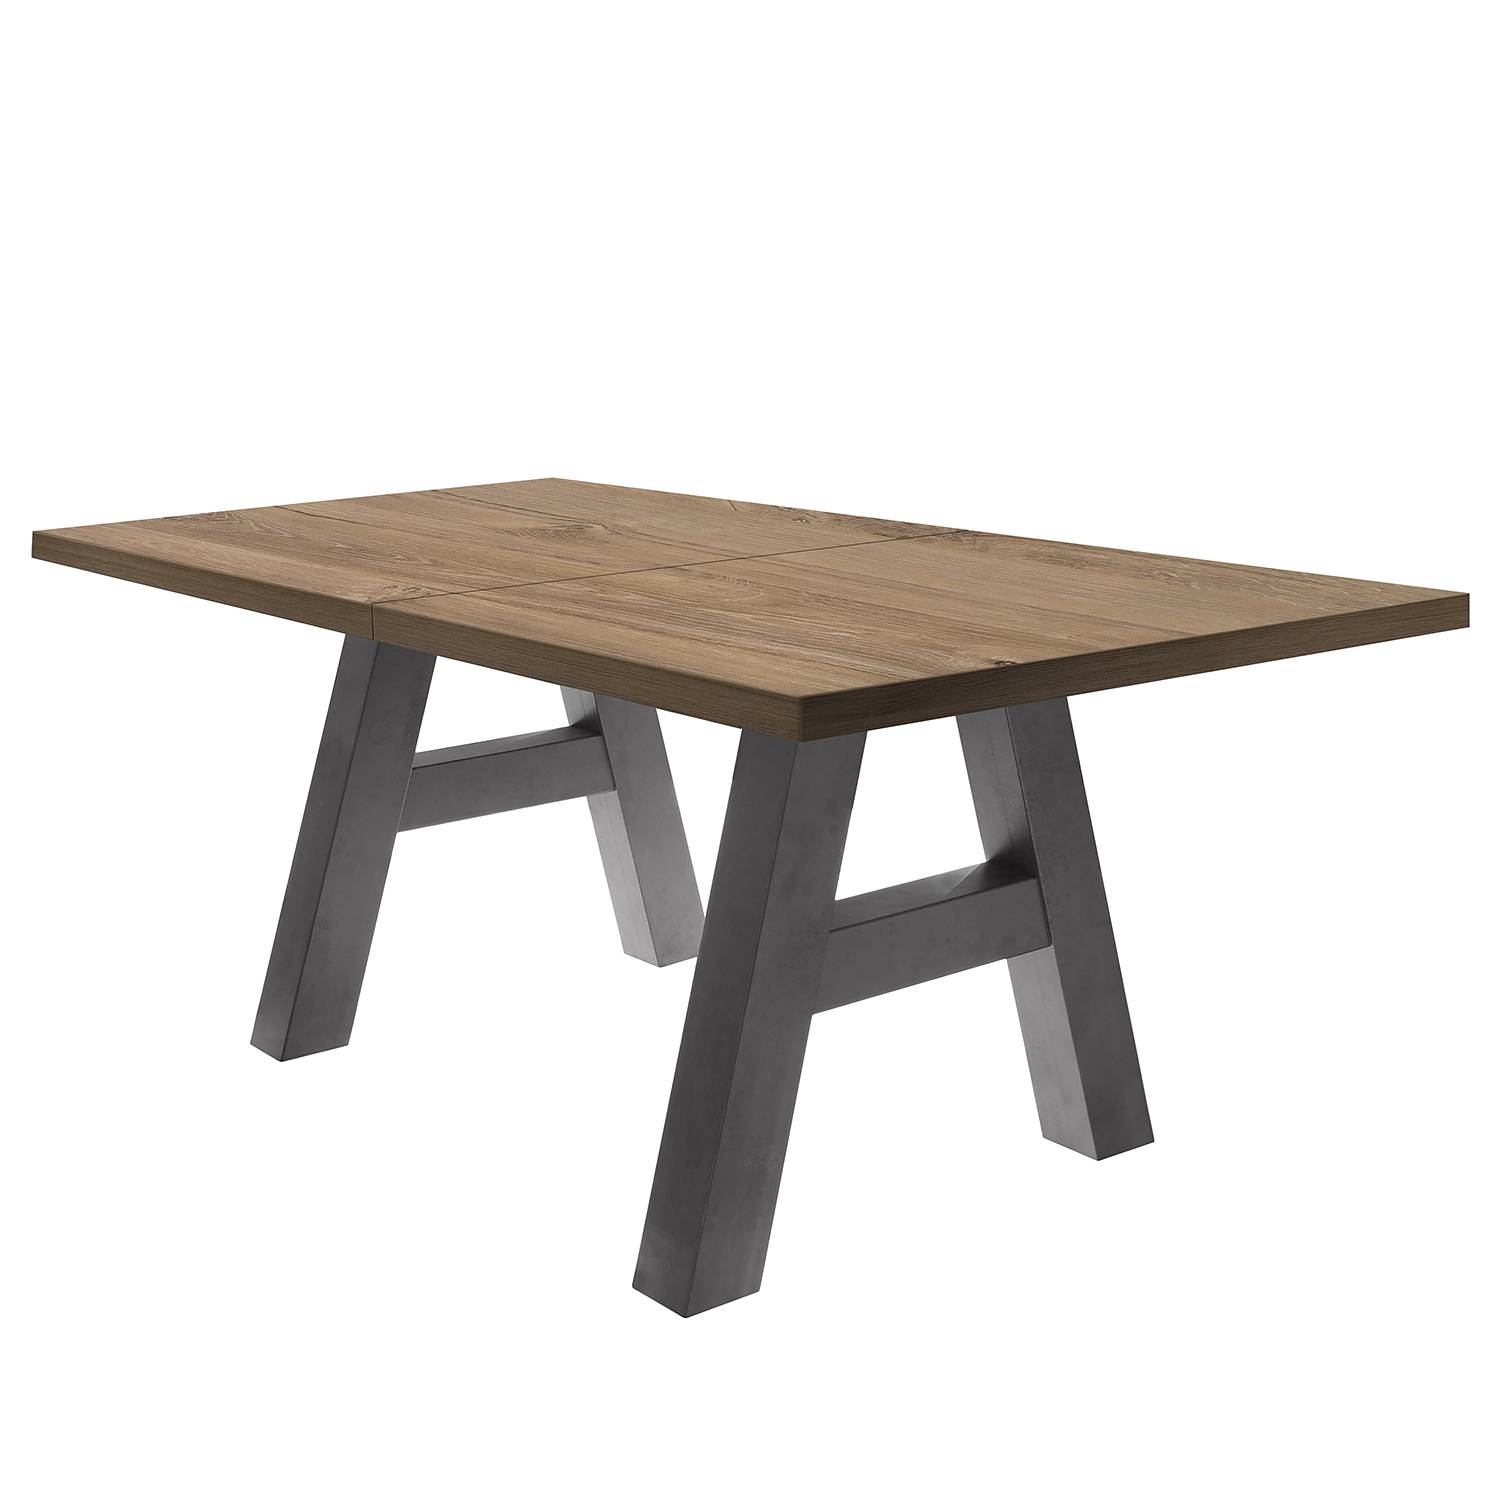 Image of Table extensible Leeton l 000000001000121555